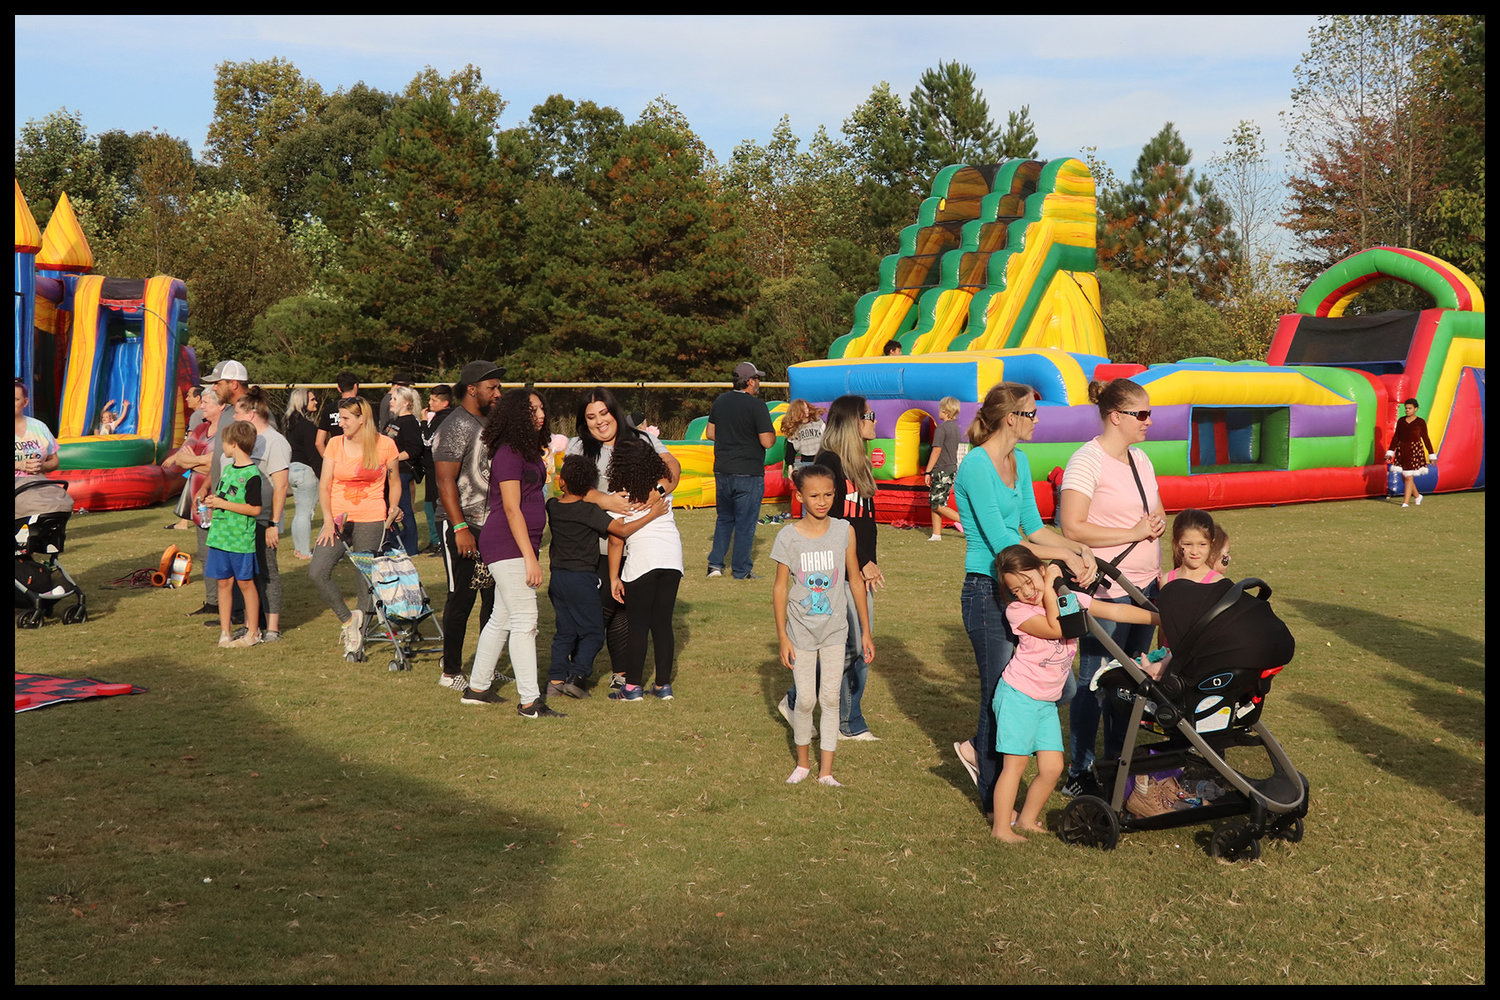 More than 500 people came to the block party designed to bless families and discover prospects for Transformation Church.